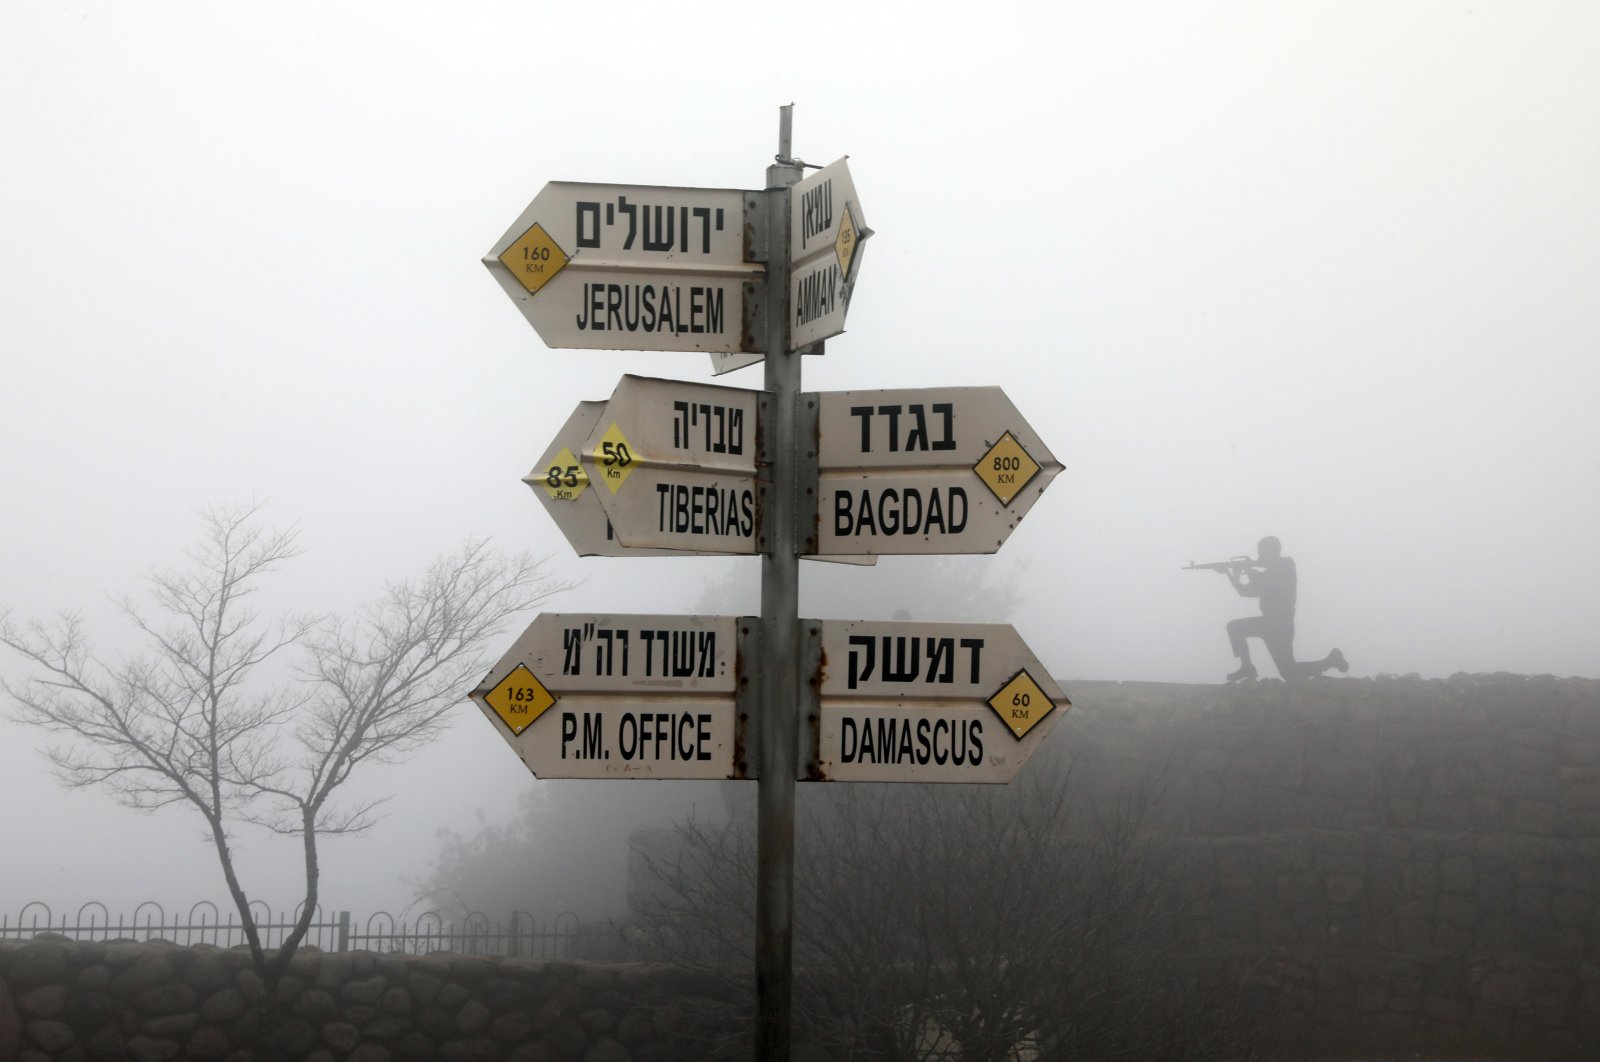 Signs pointing out distances to different cities on Mount Bental, an observation point in the Israeli-occupied Golan Heights that overlooks the Syrian side of the Quneitra crossing, March 25, 2019. (Reuters Photo)